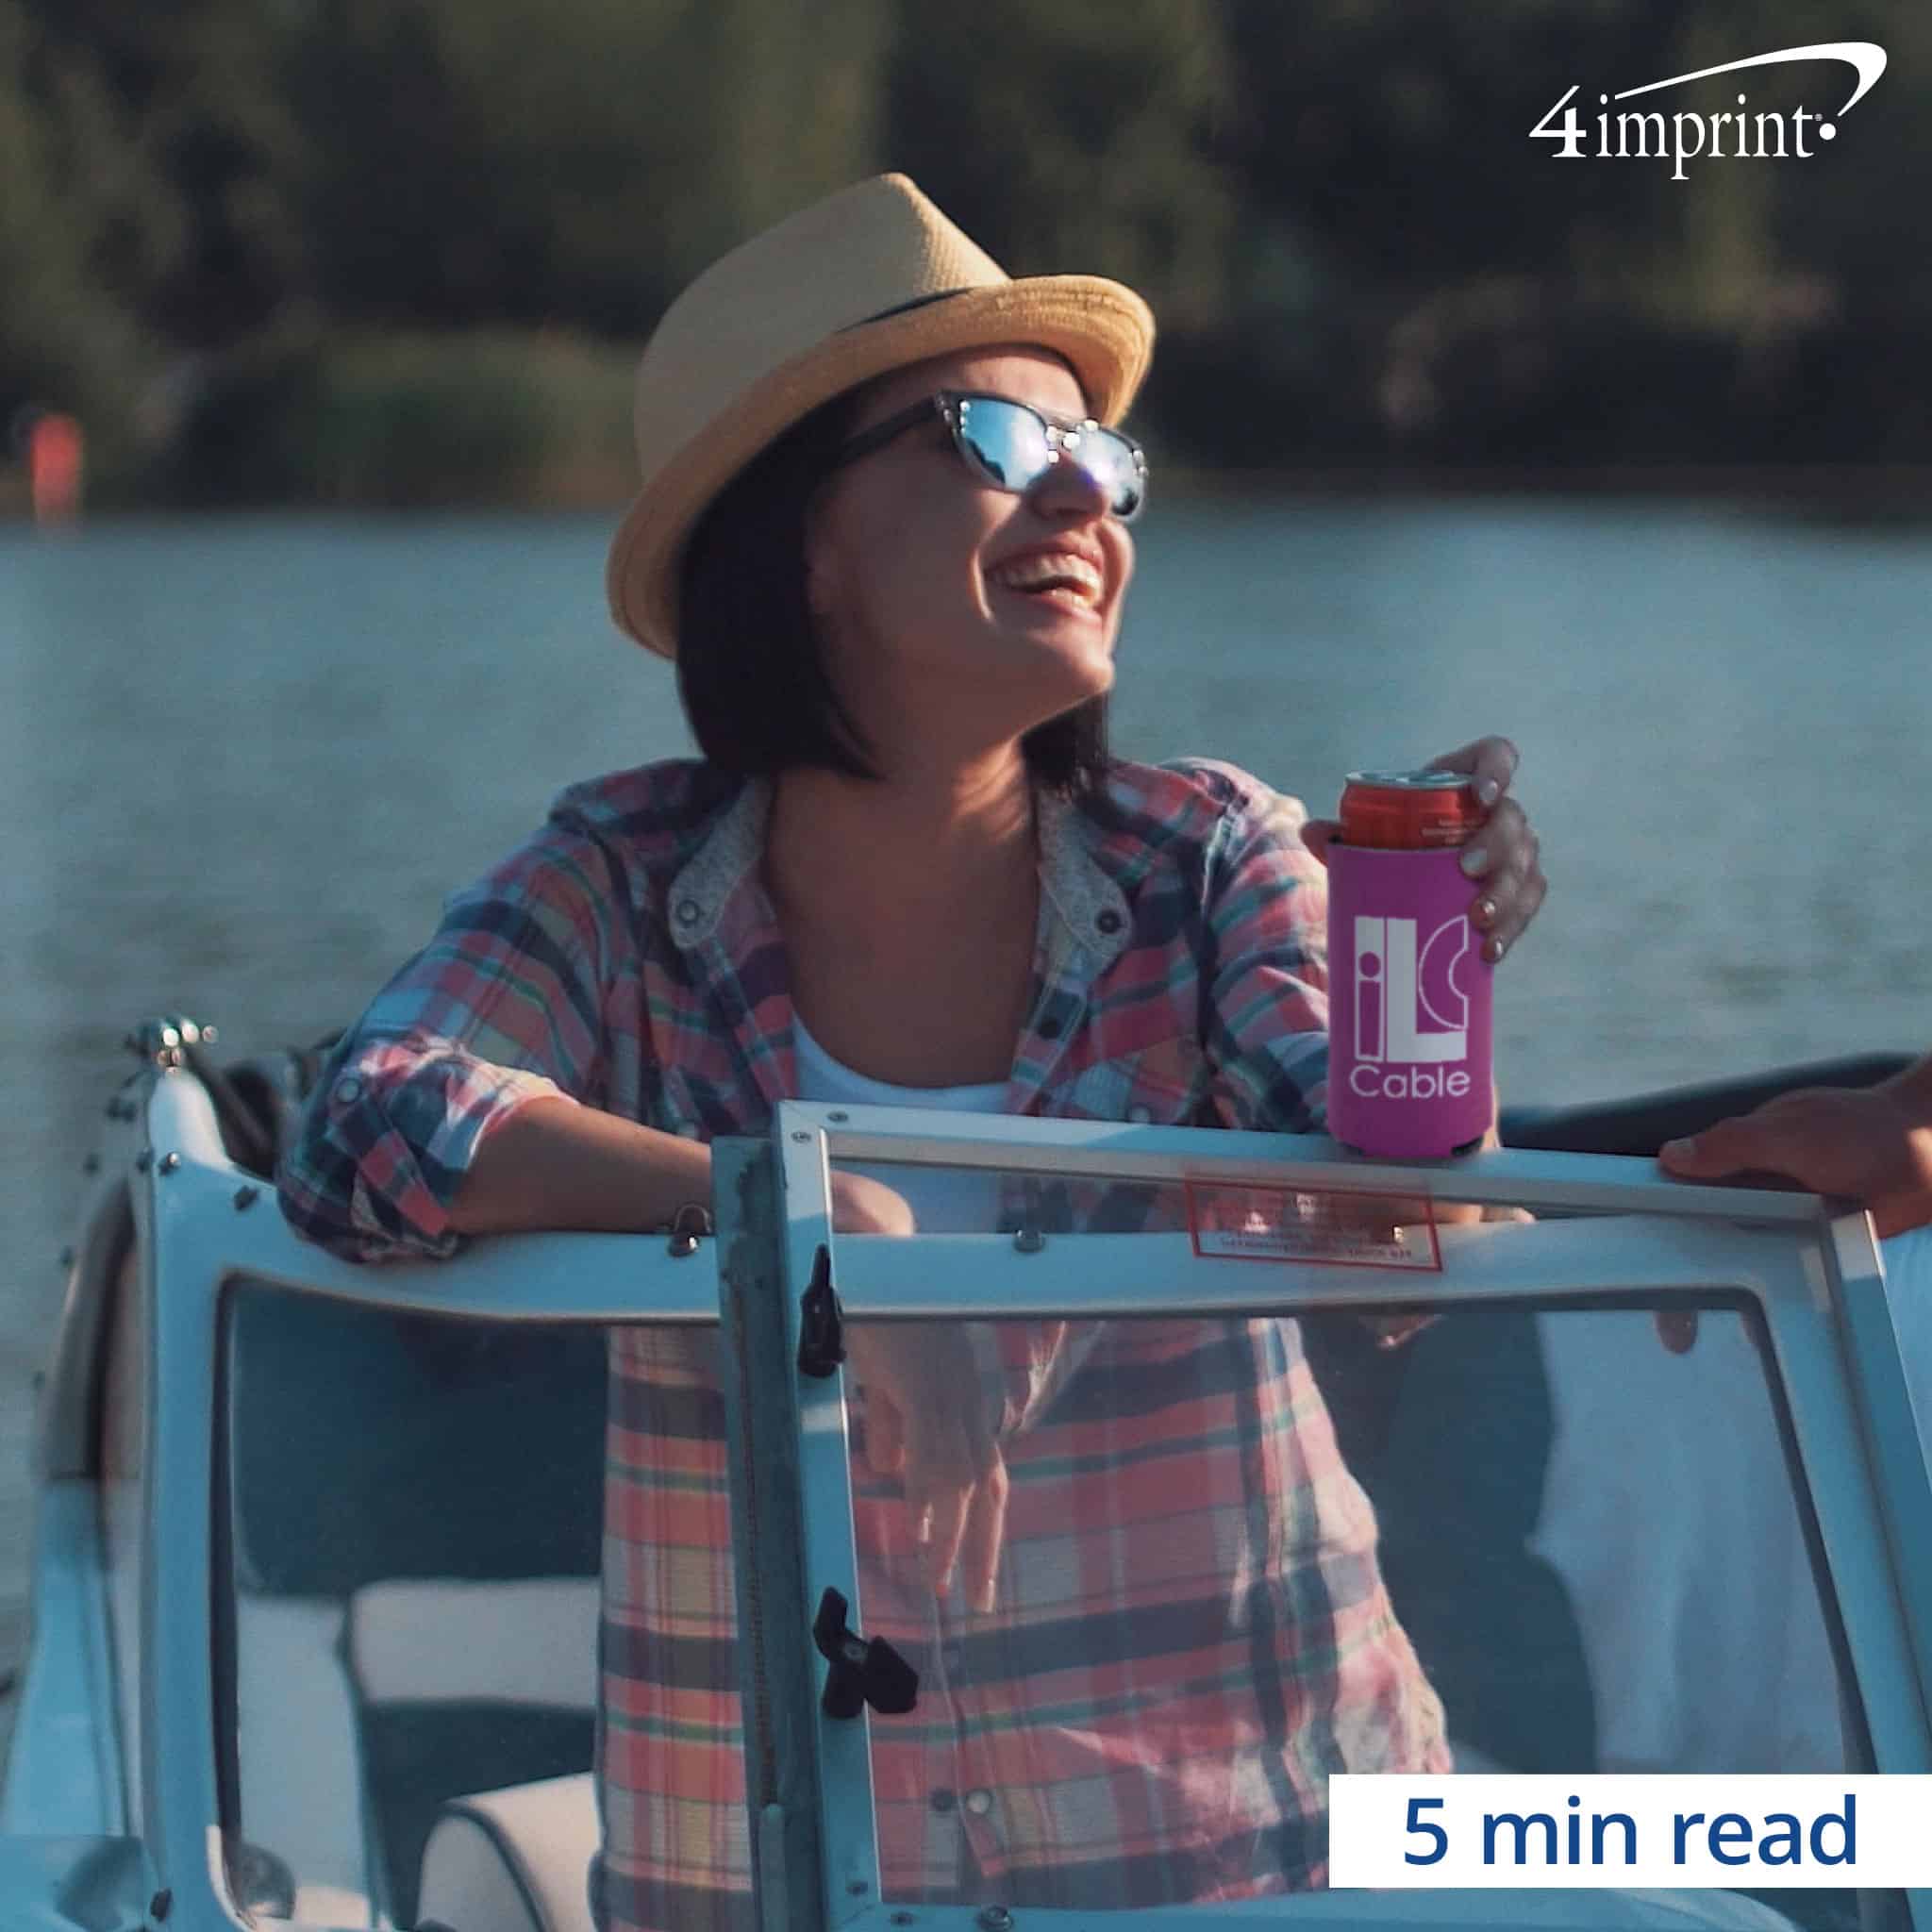 A woman sitting on a boat holding a drink in a promotional can cooler.